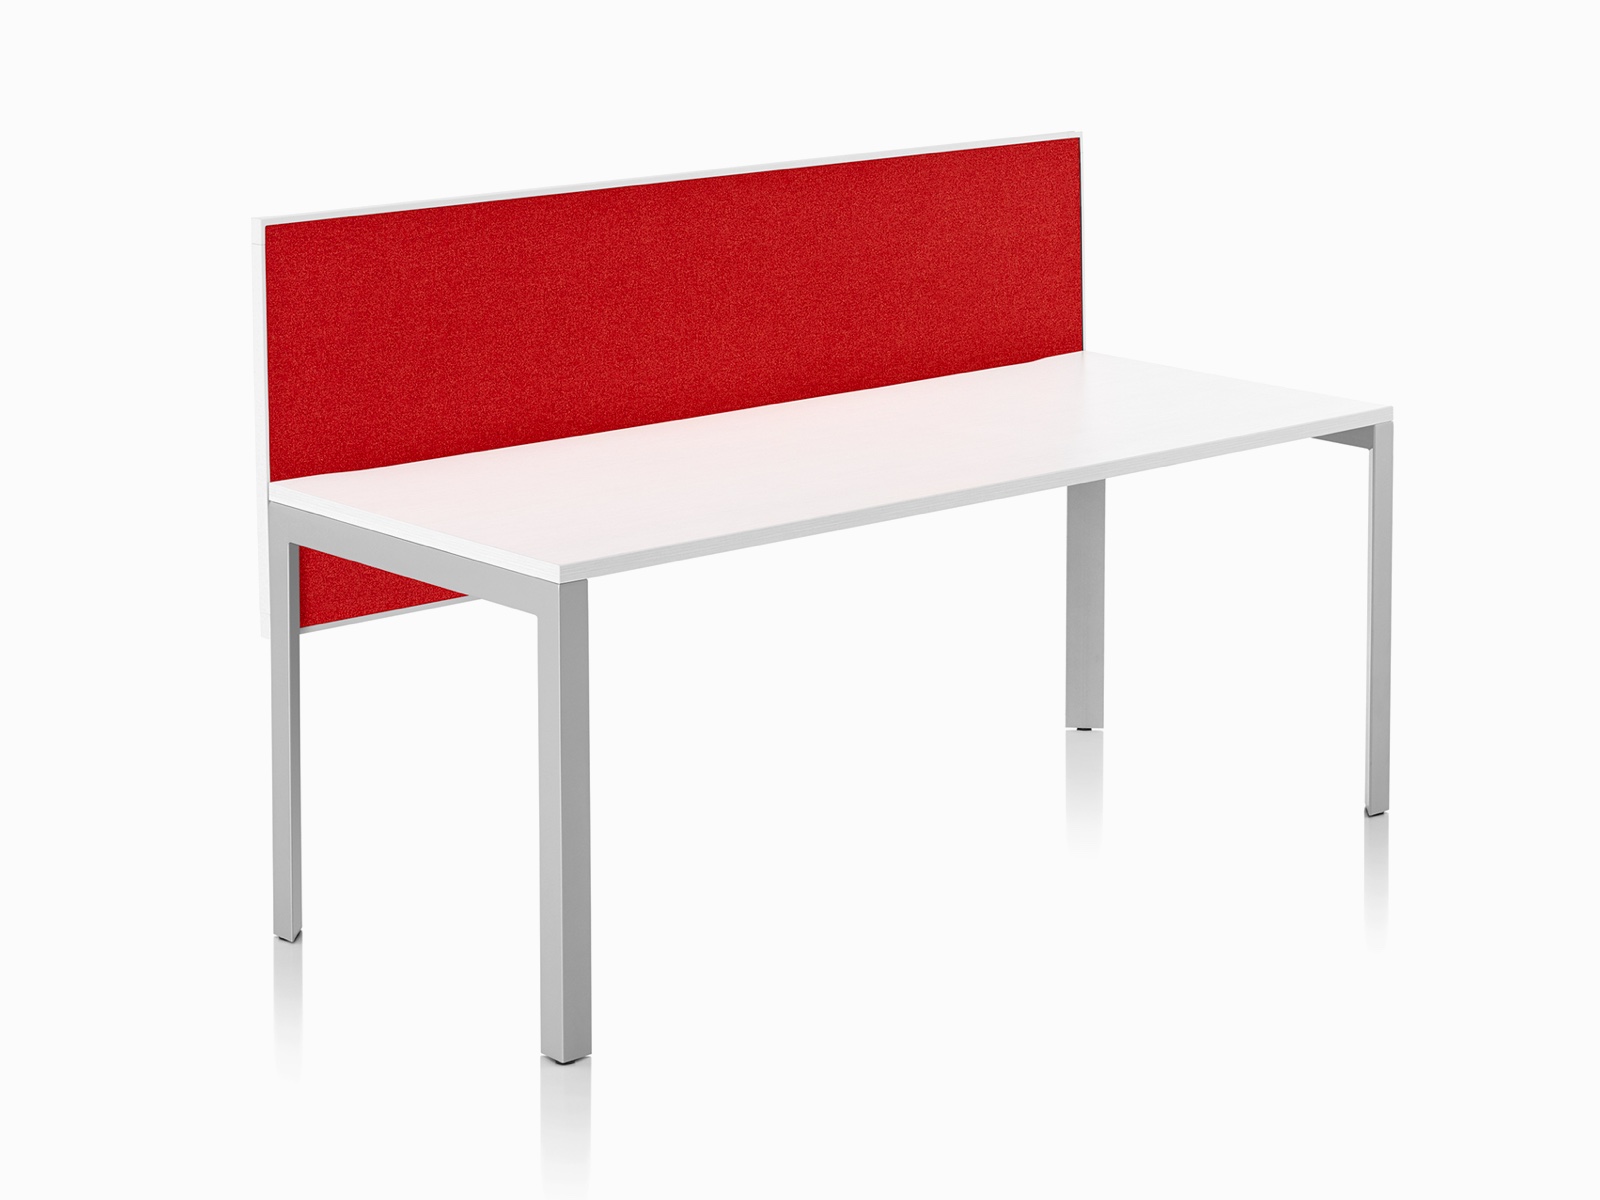 Viewed at an angle, the front side of a red fabric, framed edge, Pari surface-attached privacy screen on a white, single-sided Layout Studio bench.